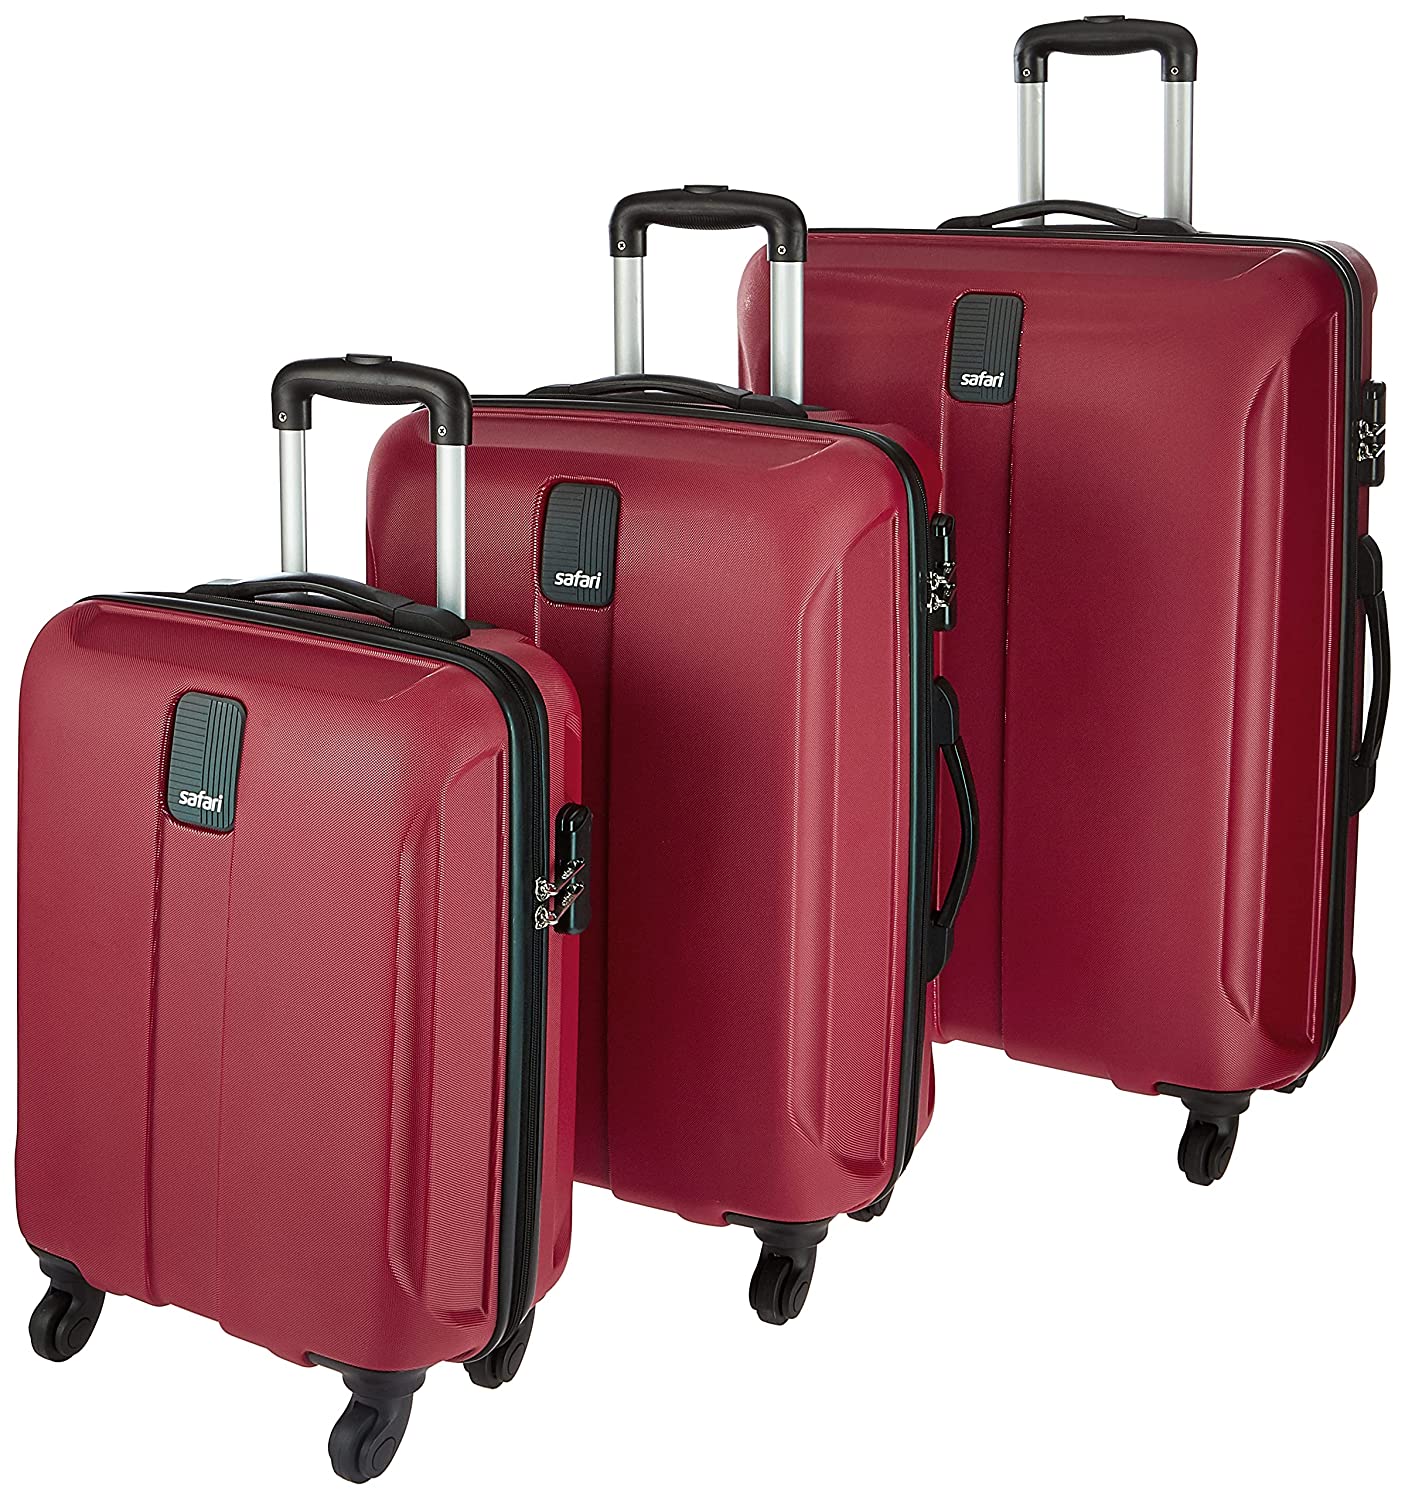 American Tourister Sky Bags Luggage Bags Under Rs 3000 on Amazon  ससत  म खरद Skybags स लकर American Tourister तक क Luggage Bags